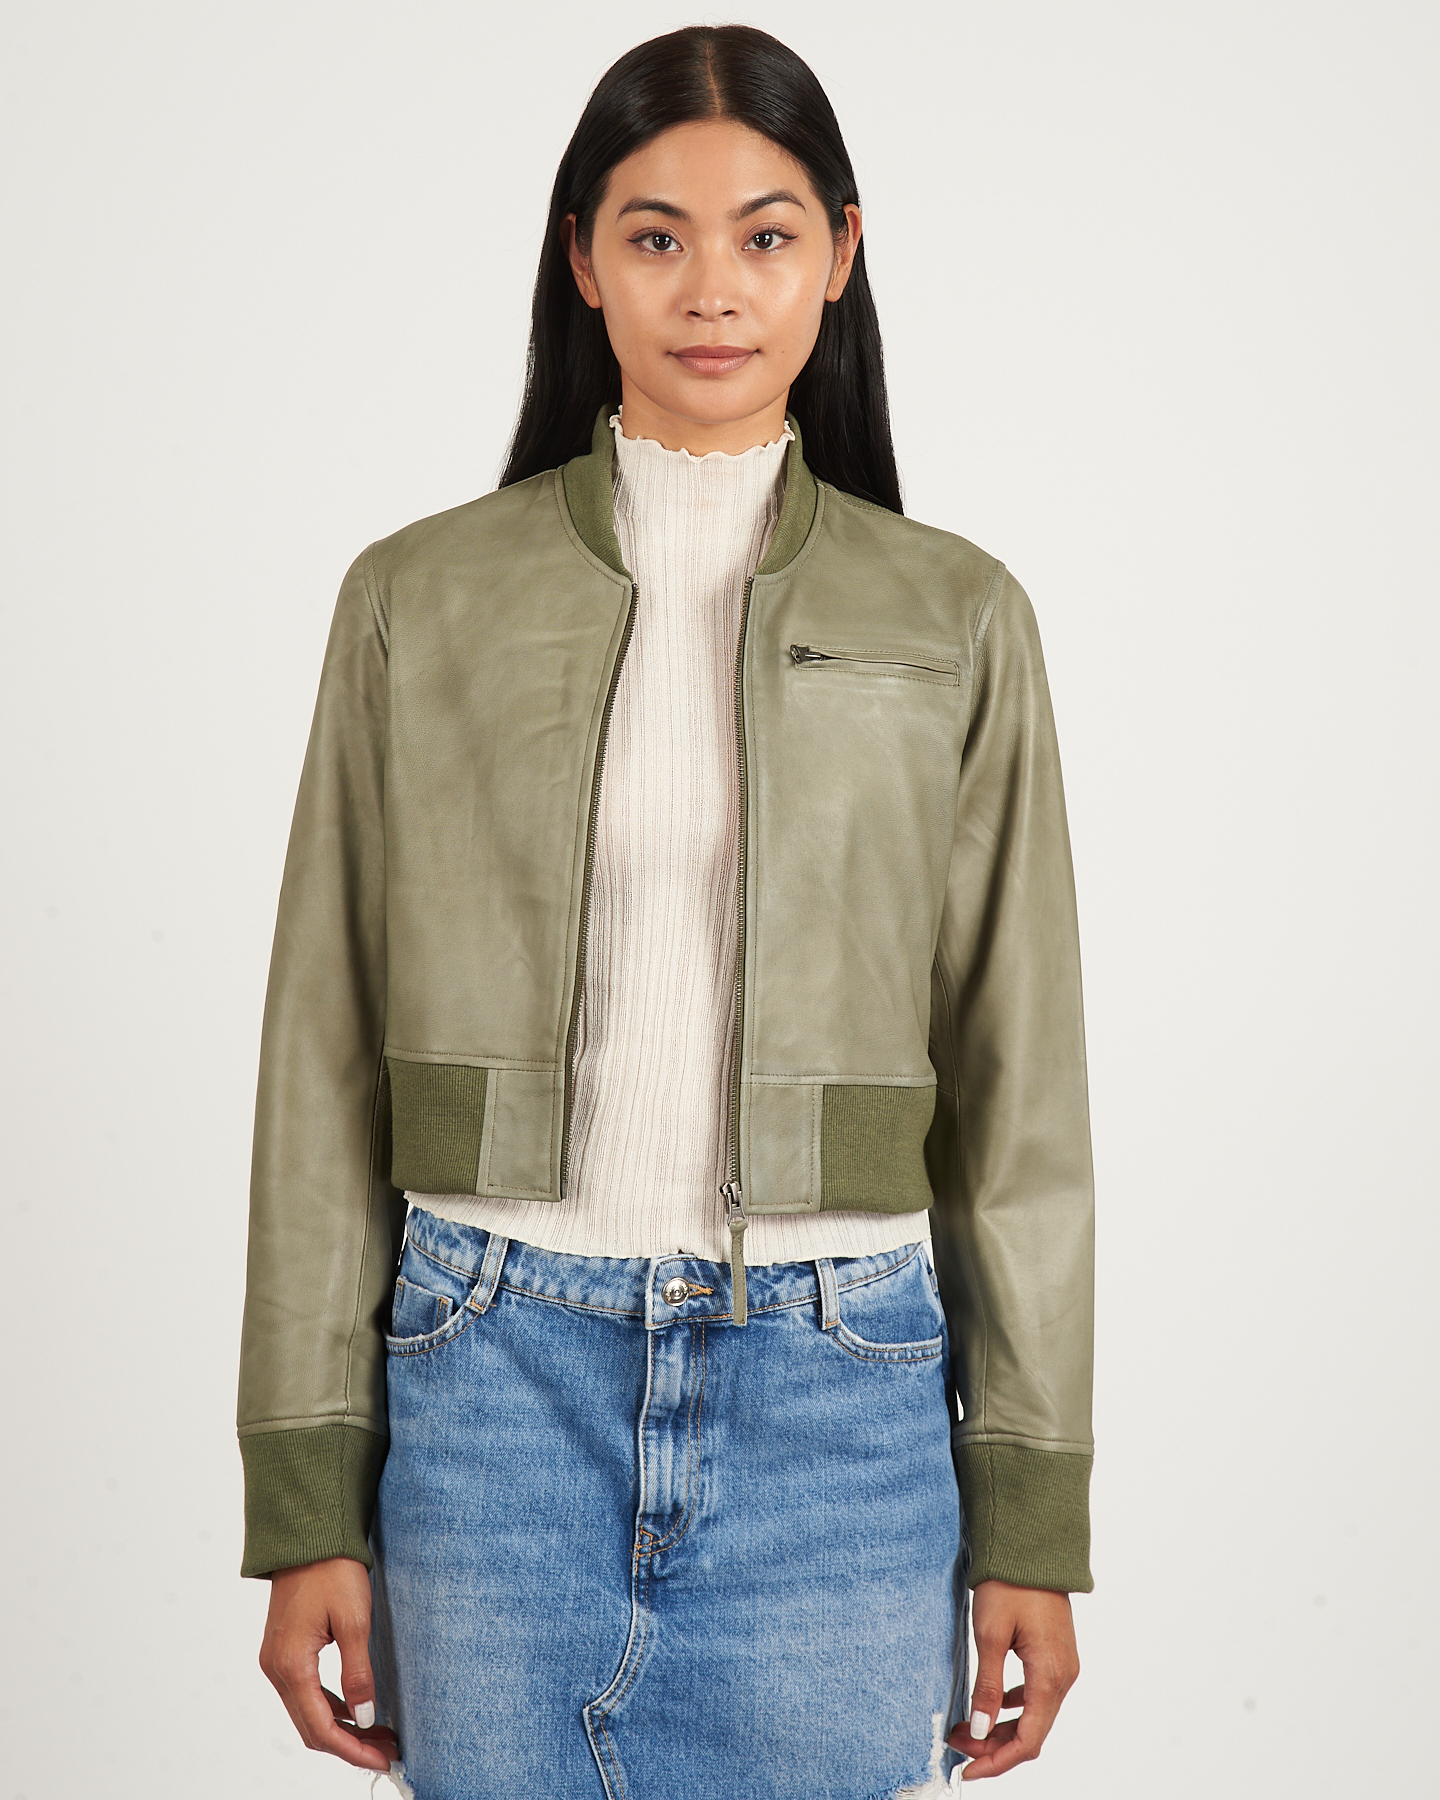 COLLINS PATINA LEATHER JACKET - ARMY